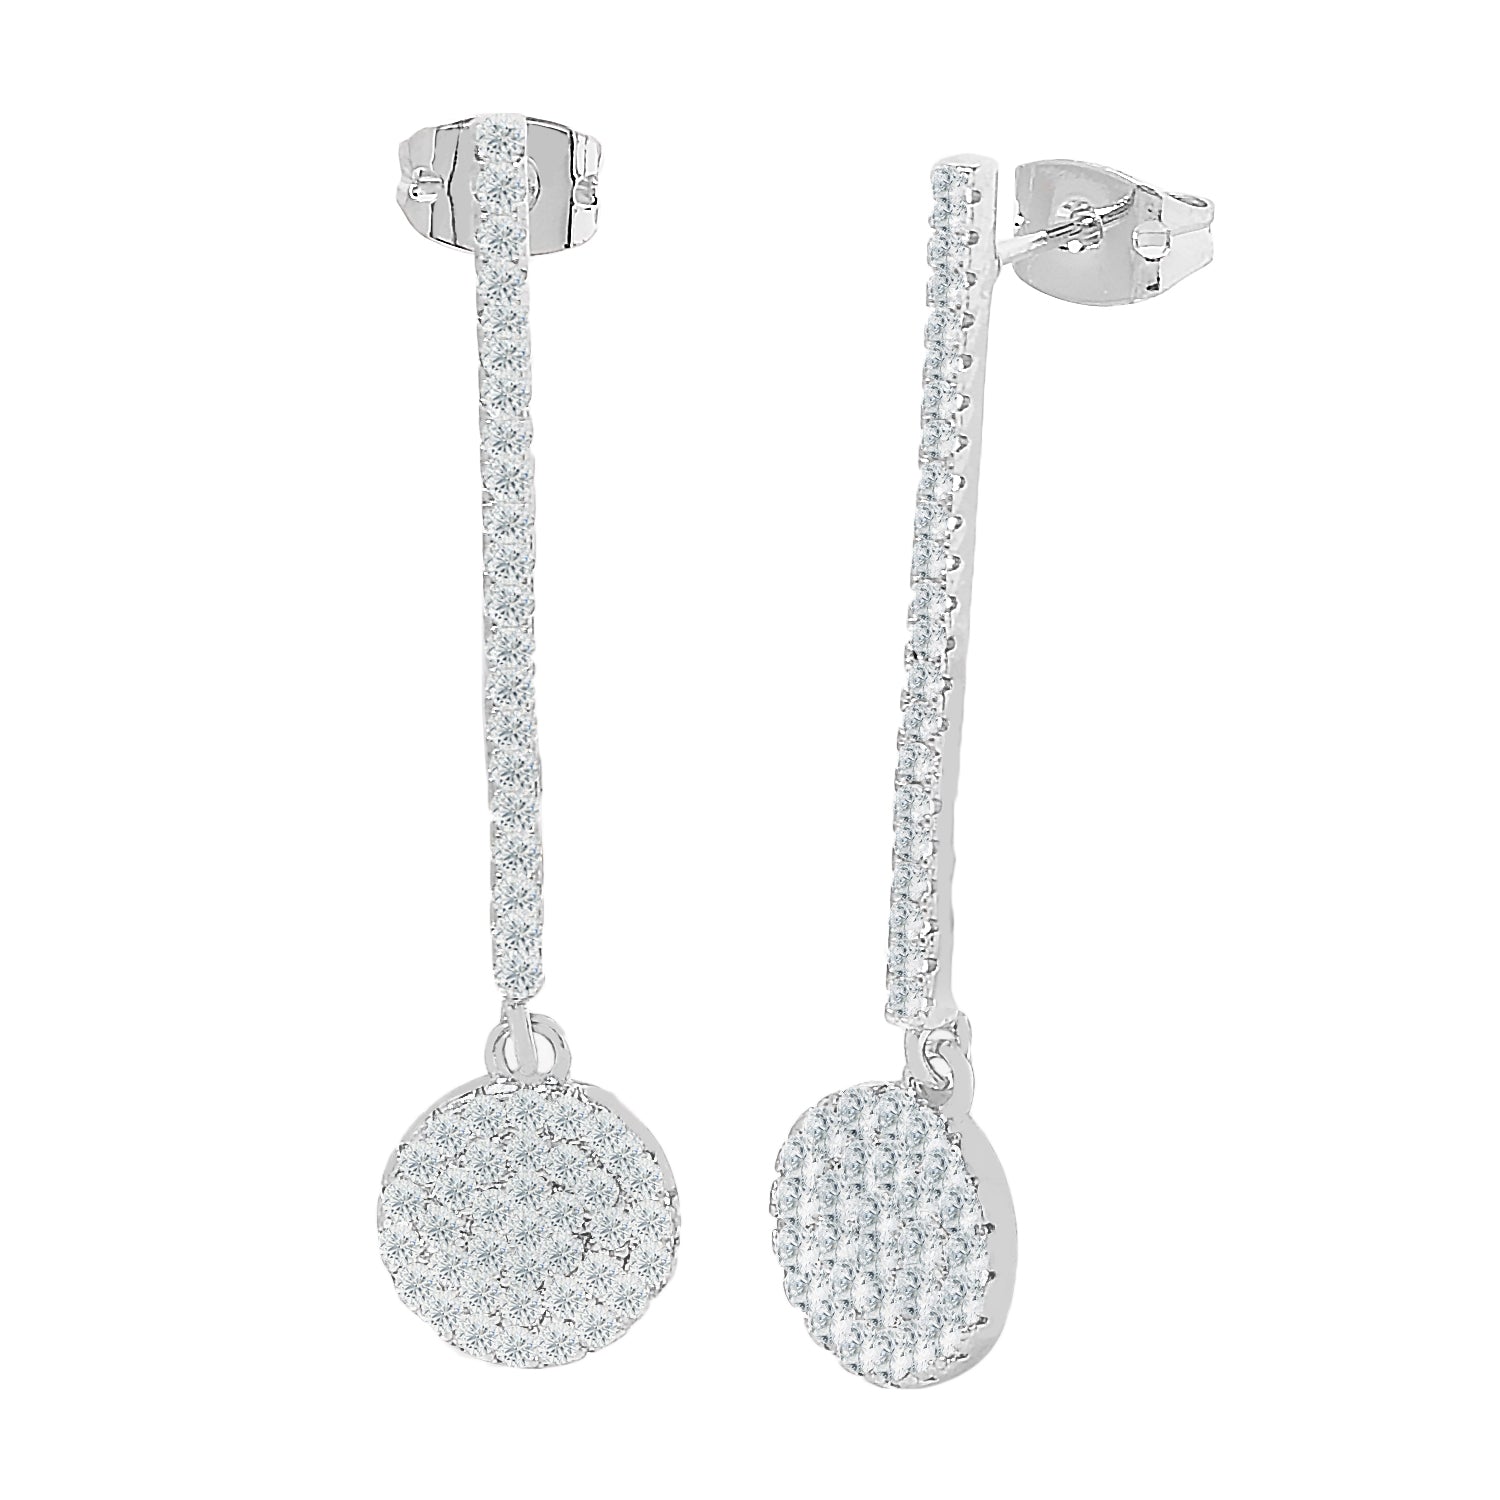 Hazel 18k White Gold Plated Silver Drop Dangle Earrings with Simulated Diamond CZ Crystals